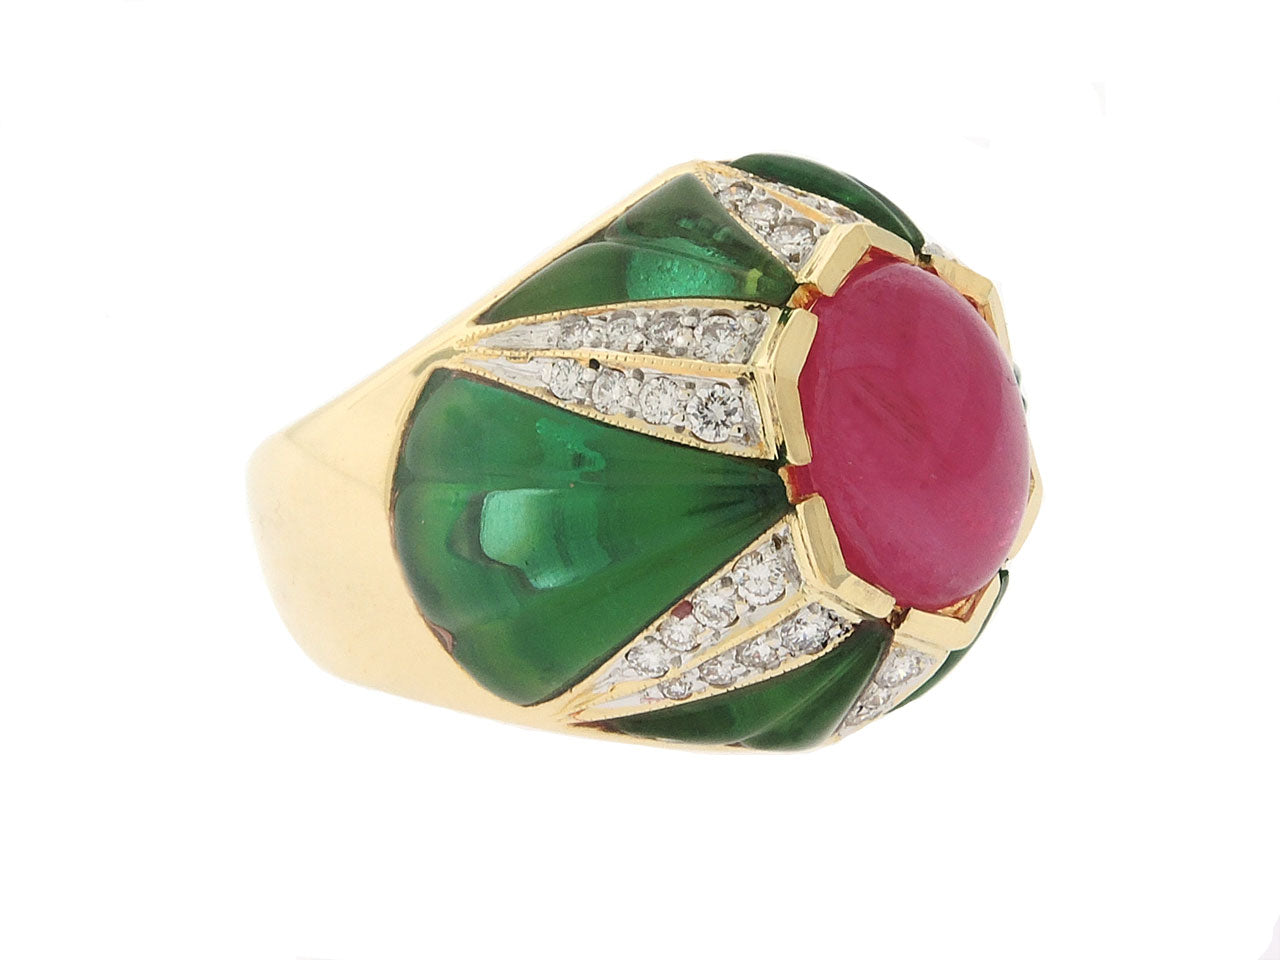 Cabochon Ruby, Diamond and Green Glass Ring in 18K Gold